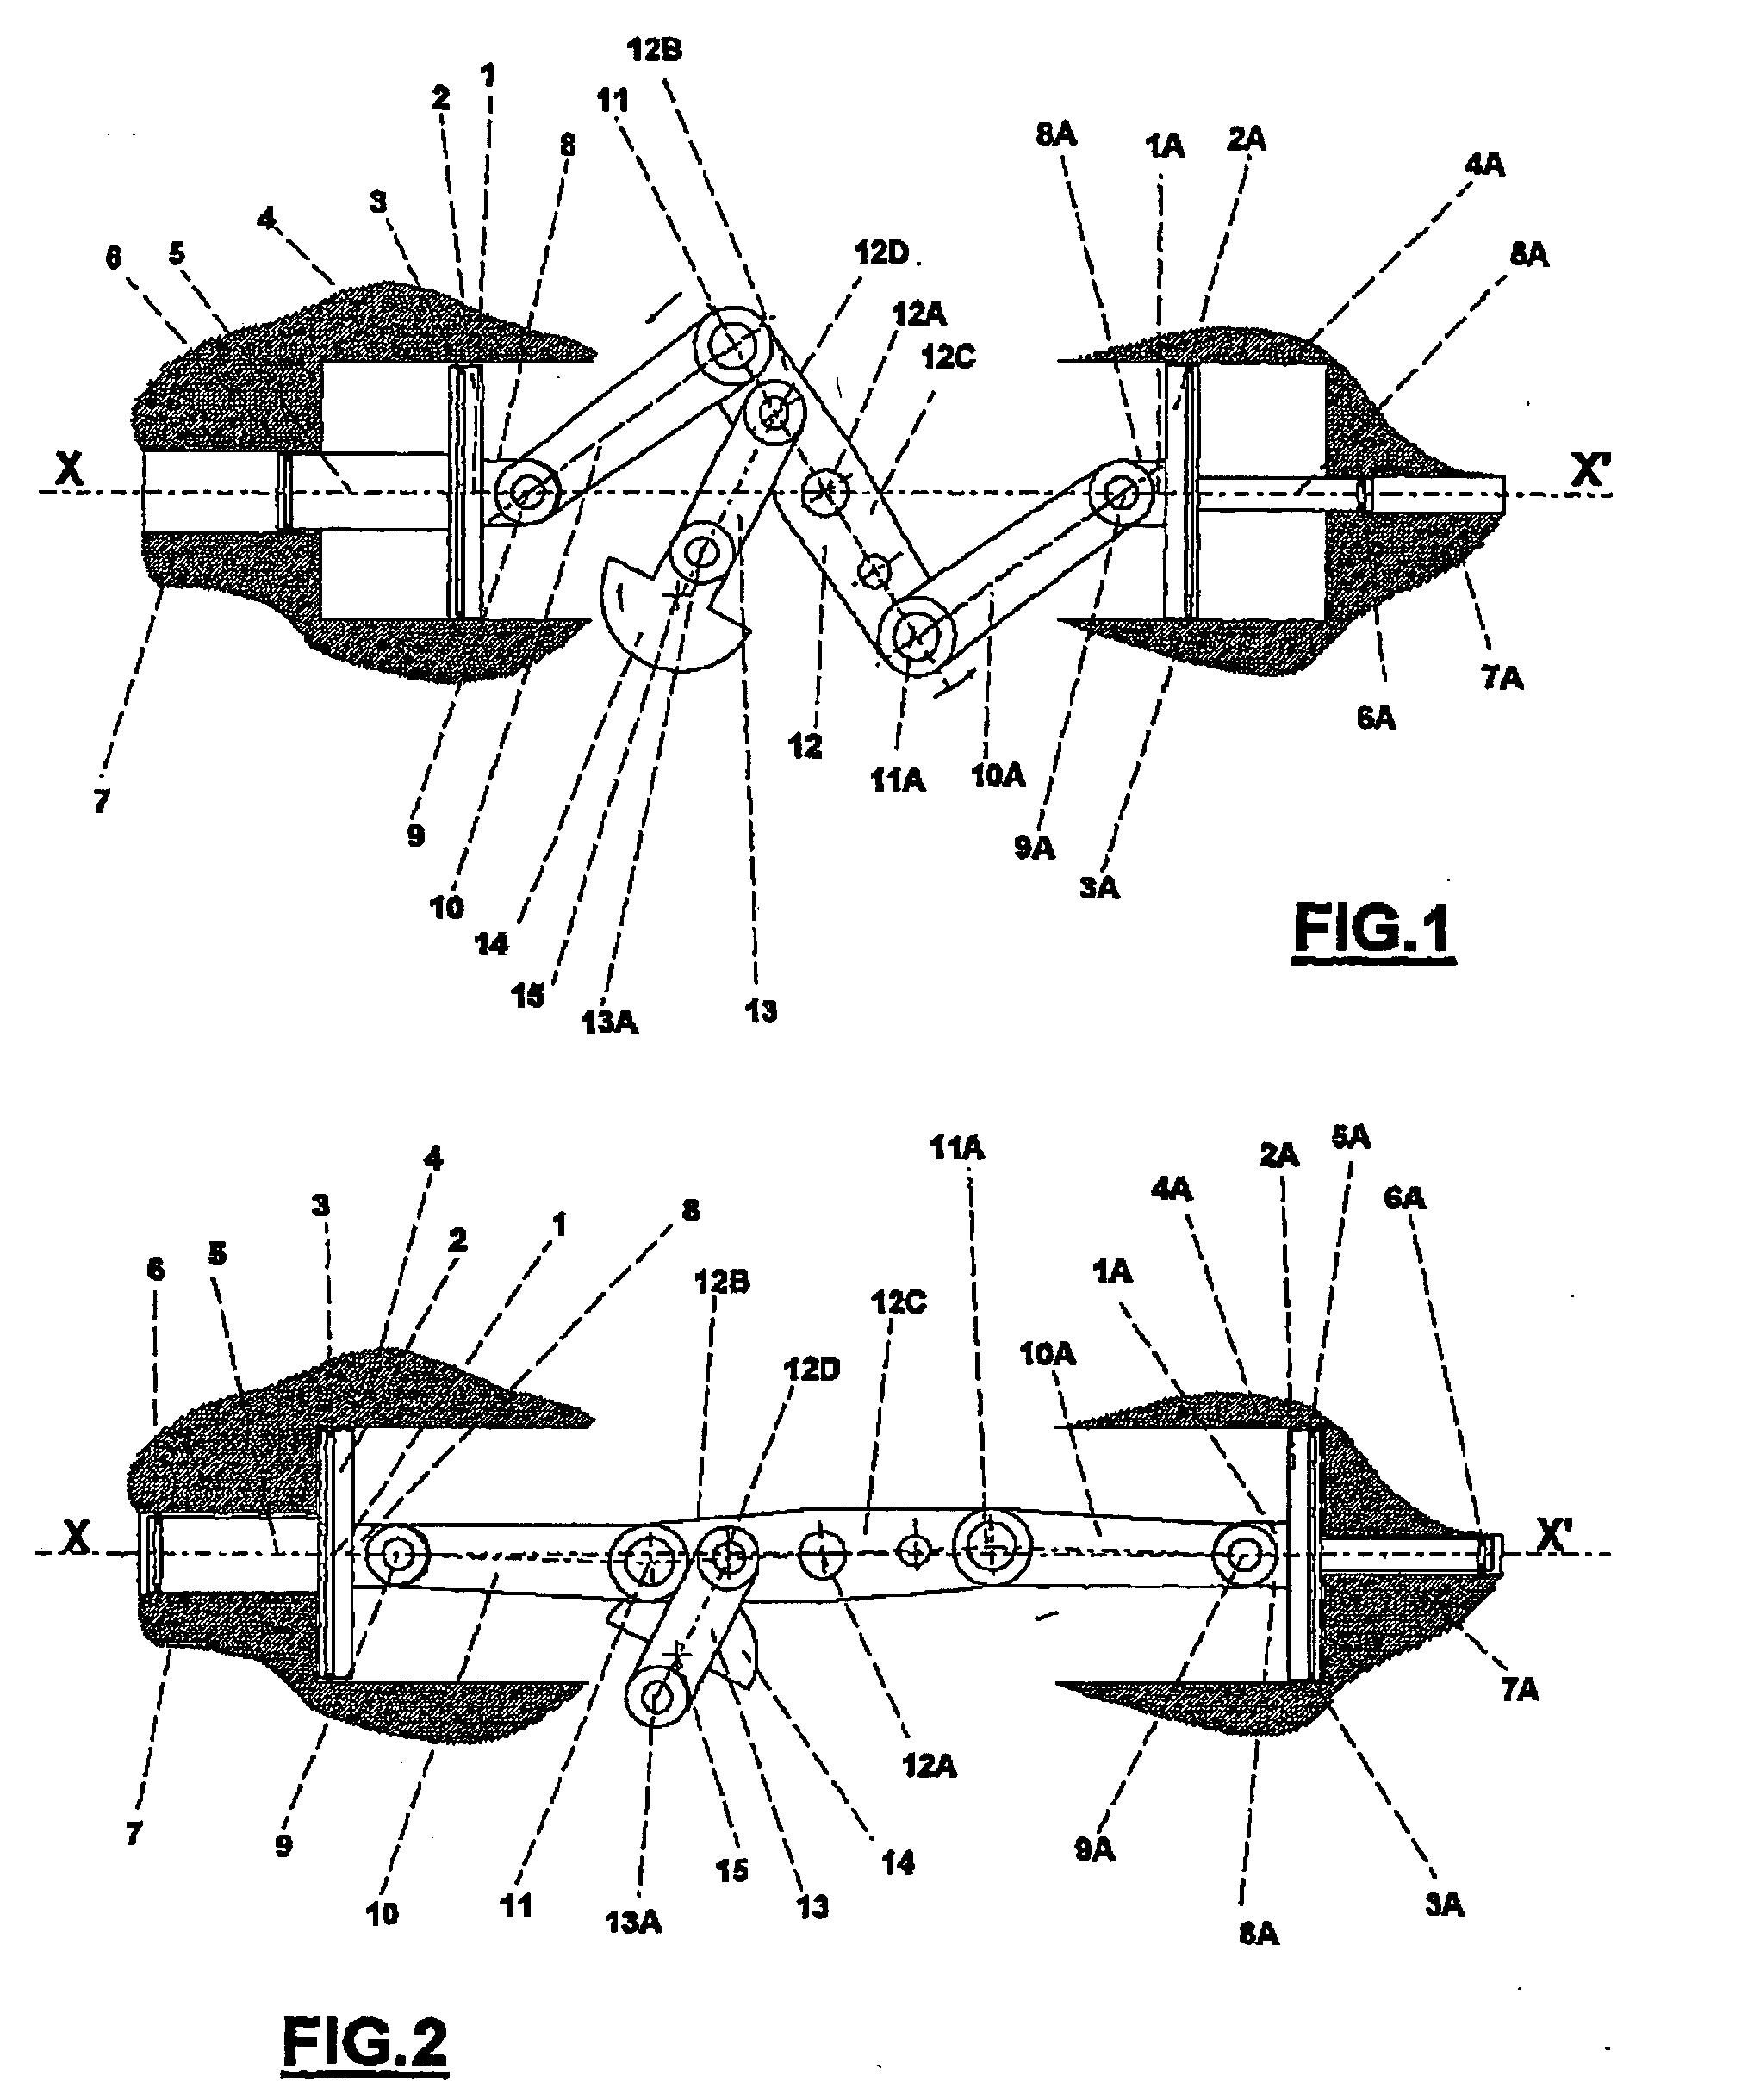 Motor-driven compressor-alternator unit with additional compressed air injection operating with mono and multiple energy